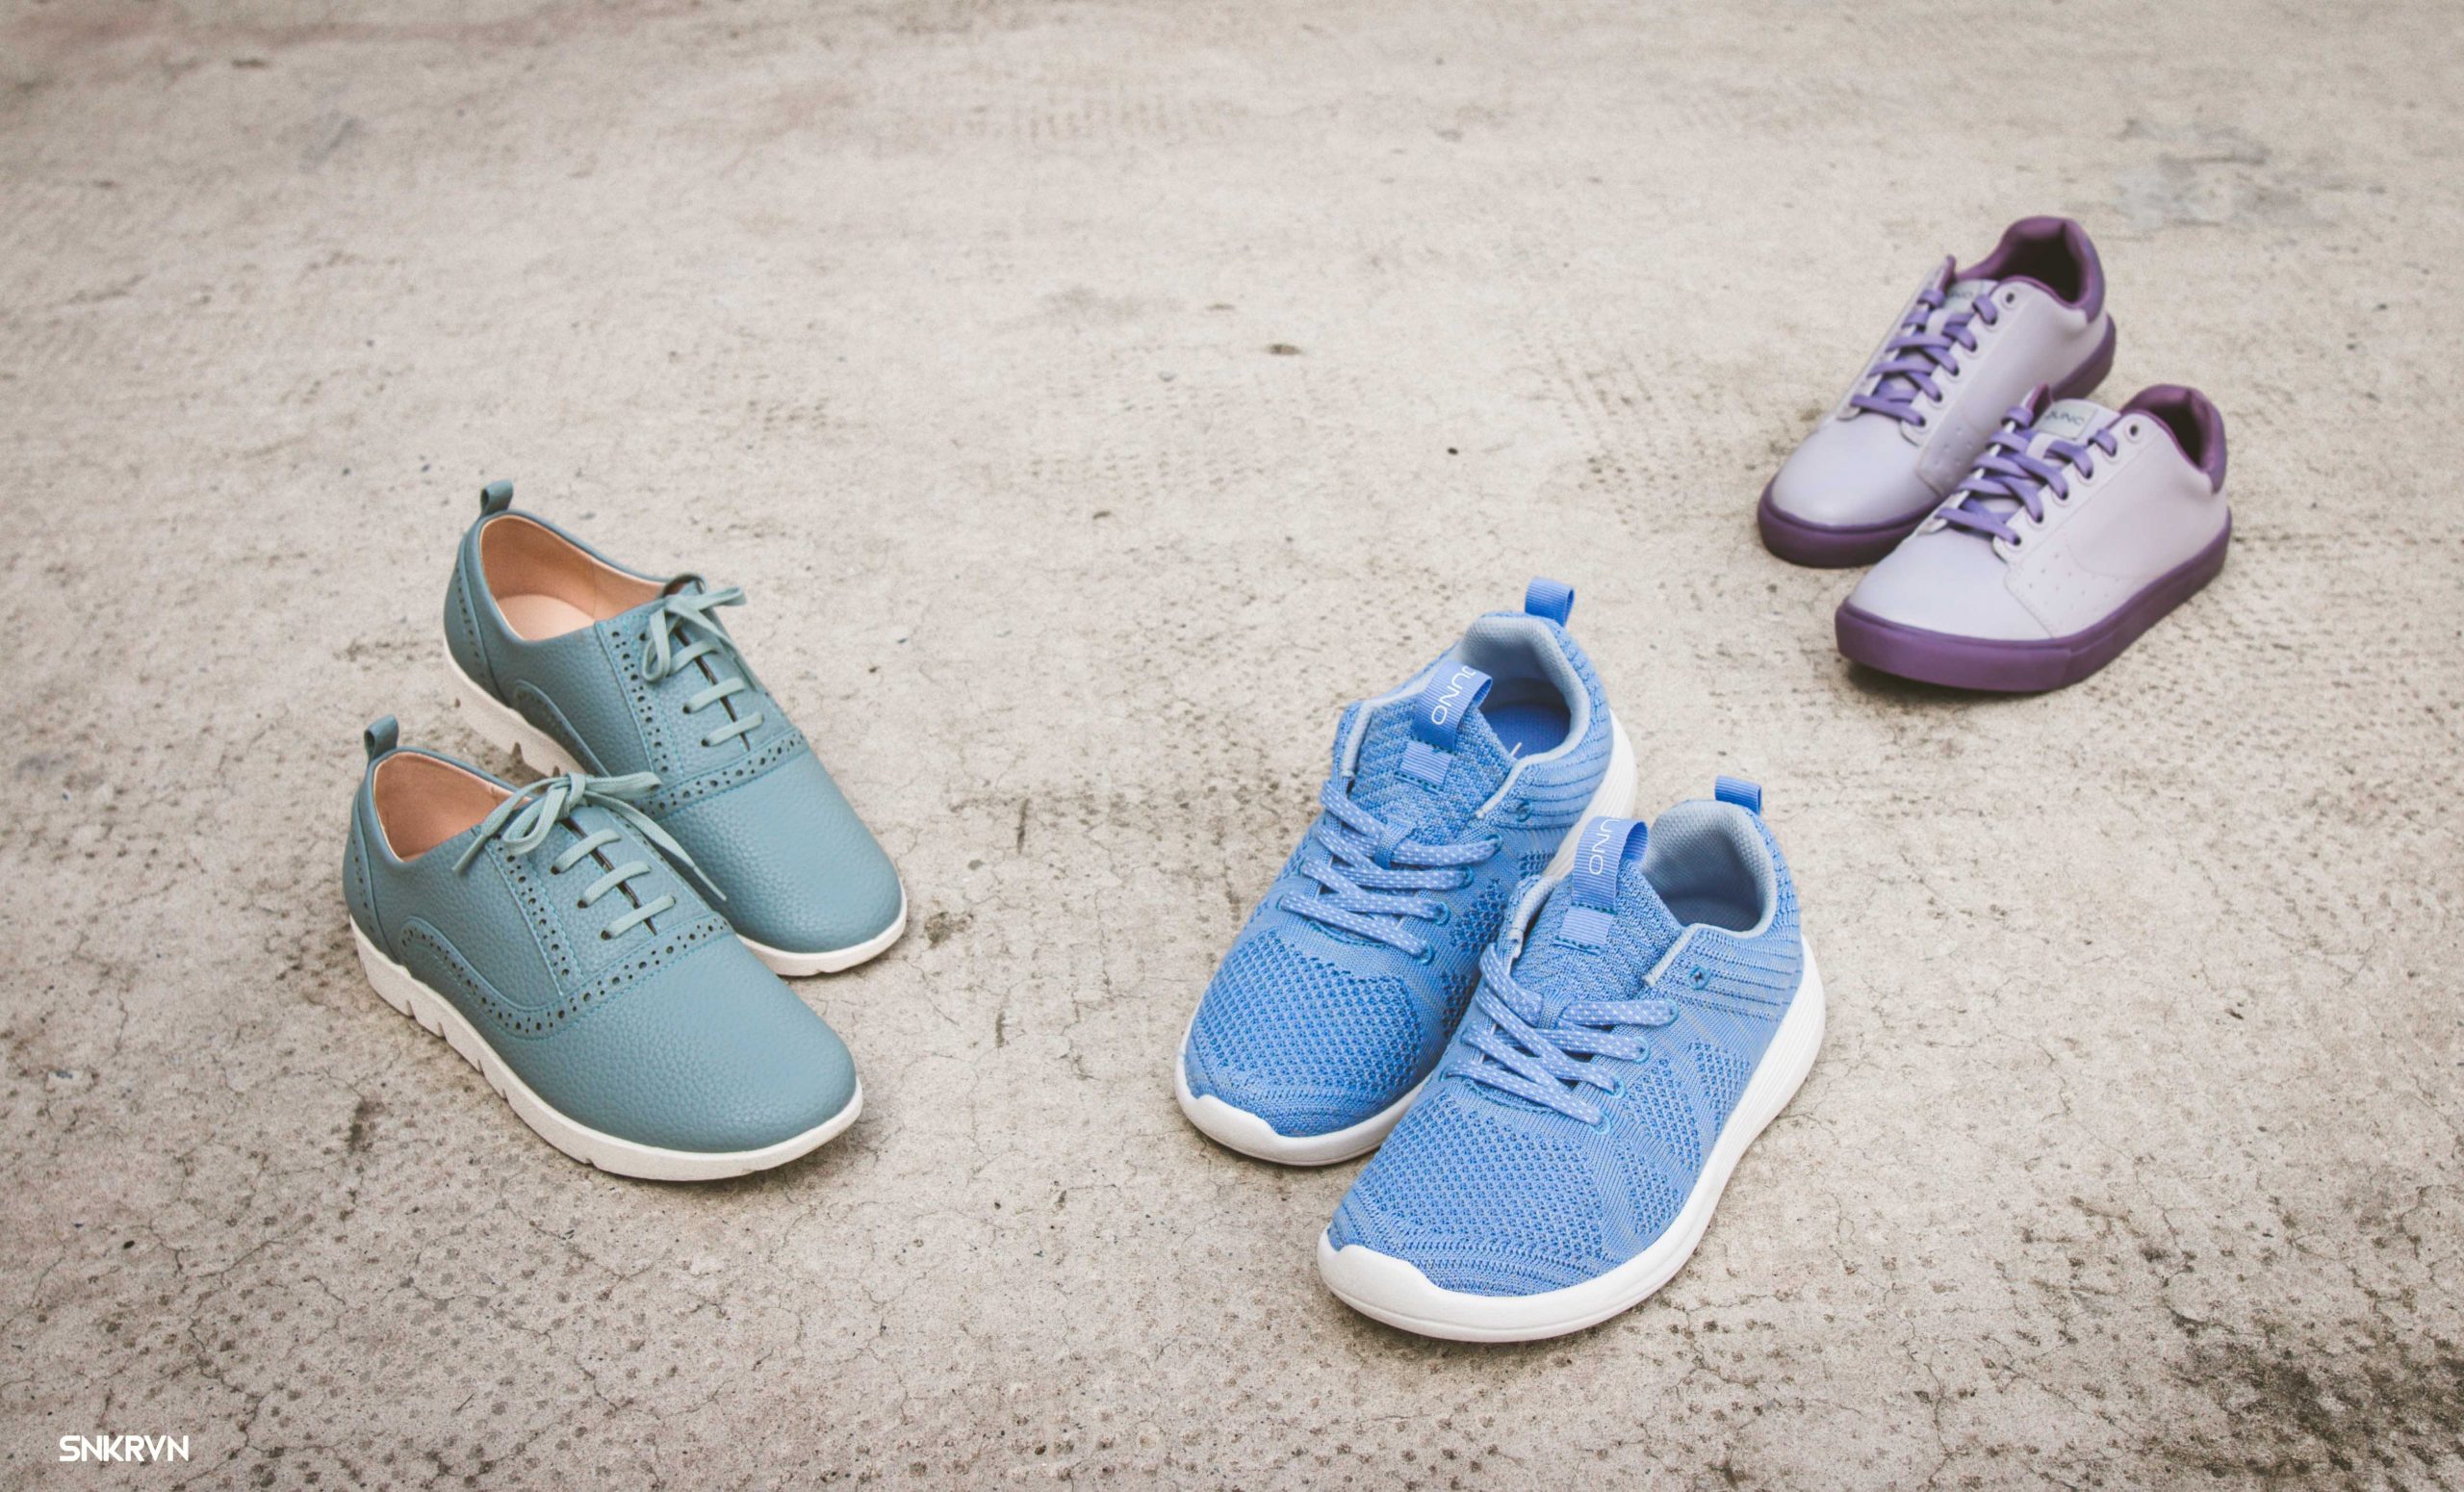 Review JUNO's Summer sneakers - Fashionable, Dynamic, Sweet